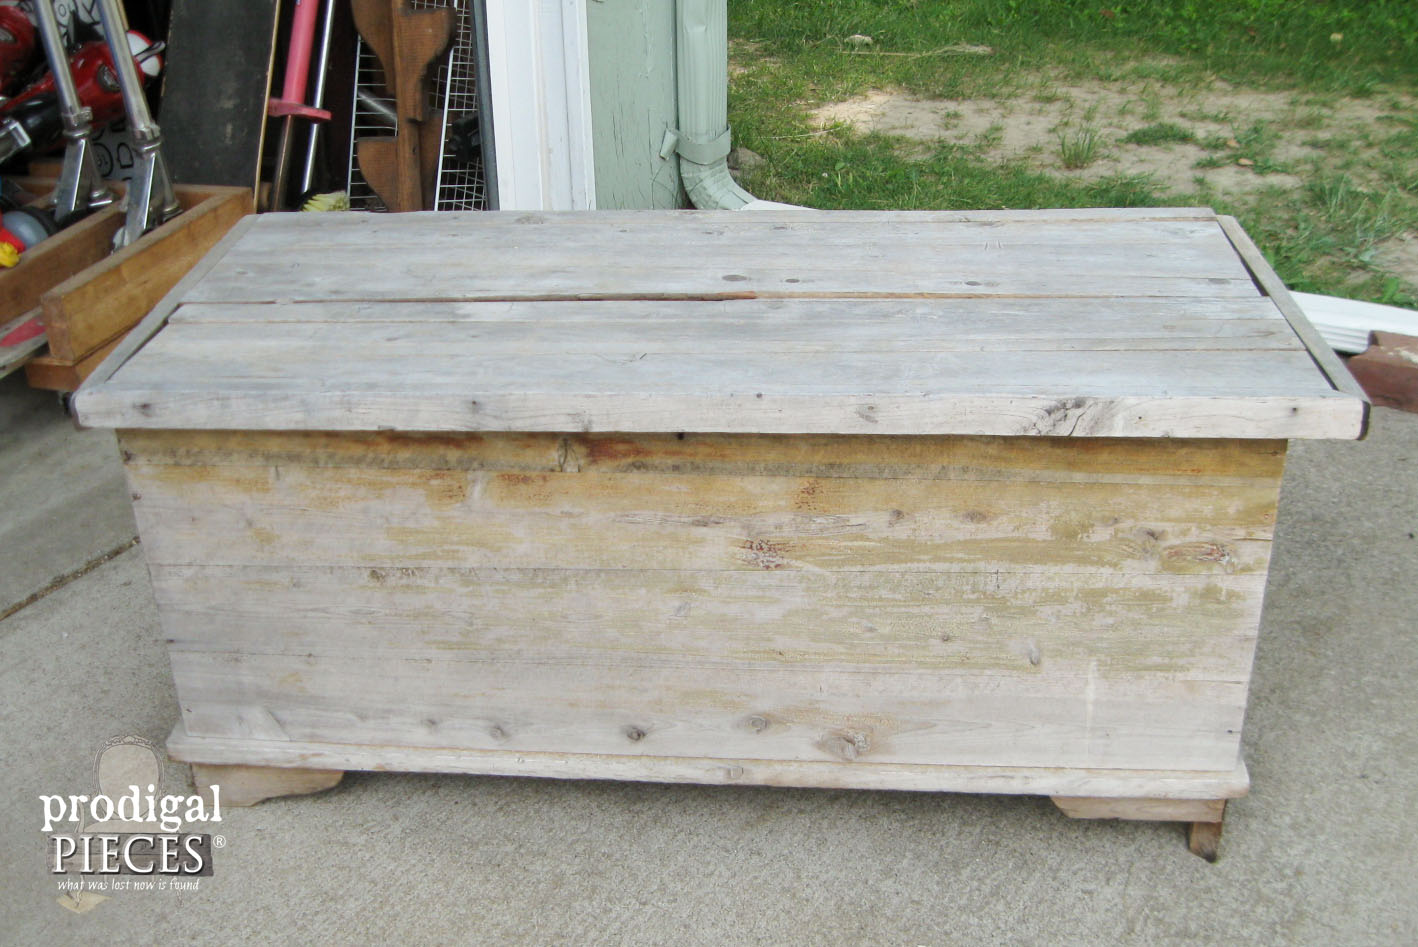 Curbside Cedar Chest Before Makeover by Prodigal Pieces | www.prodigalpieces.com